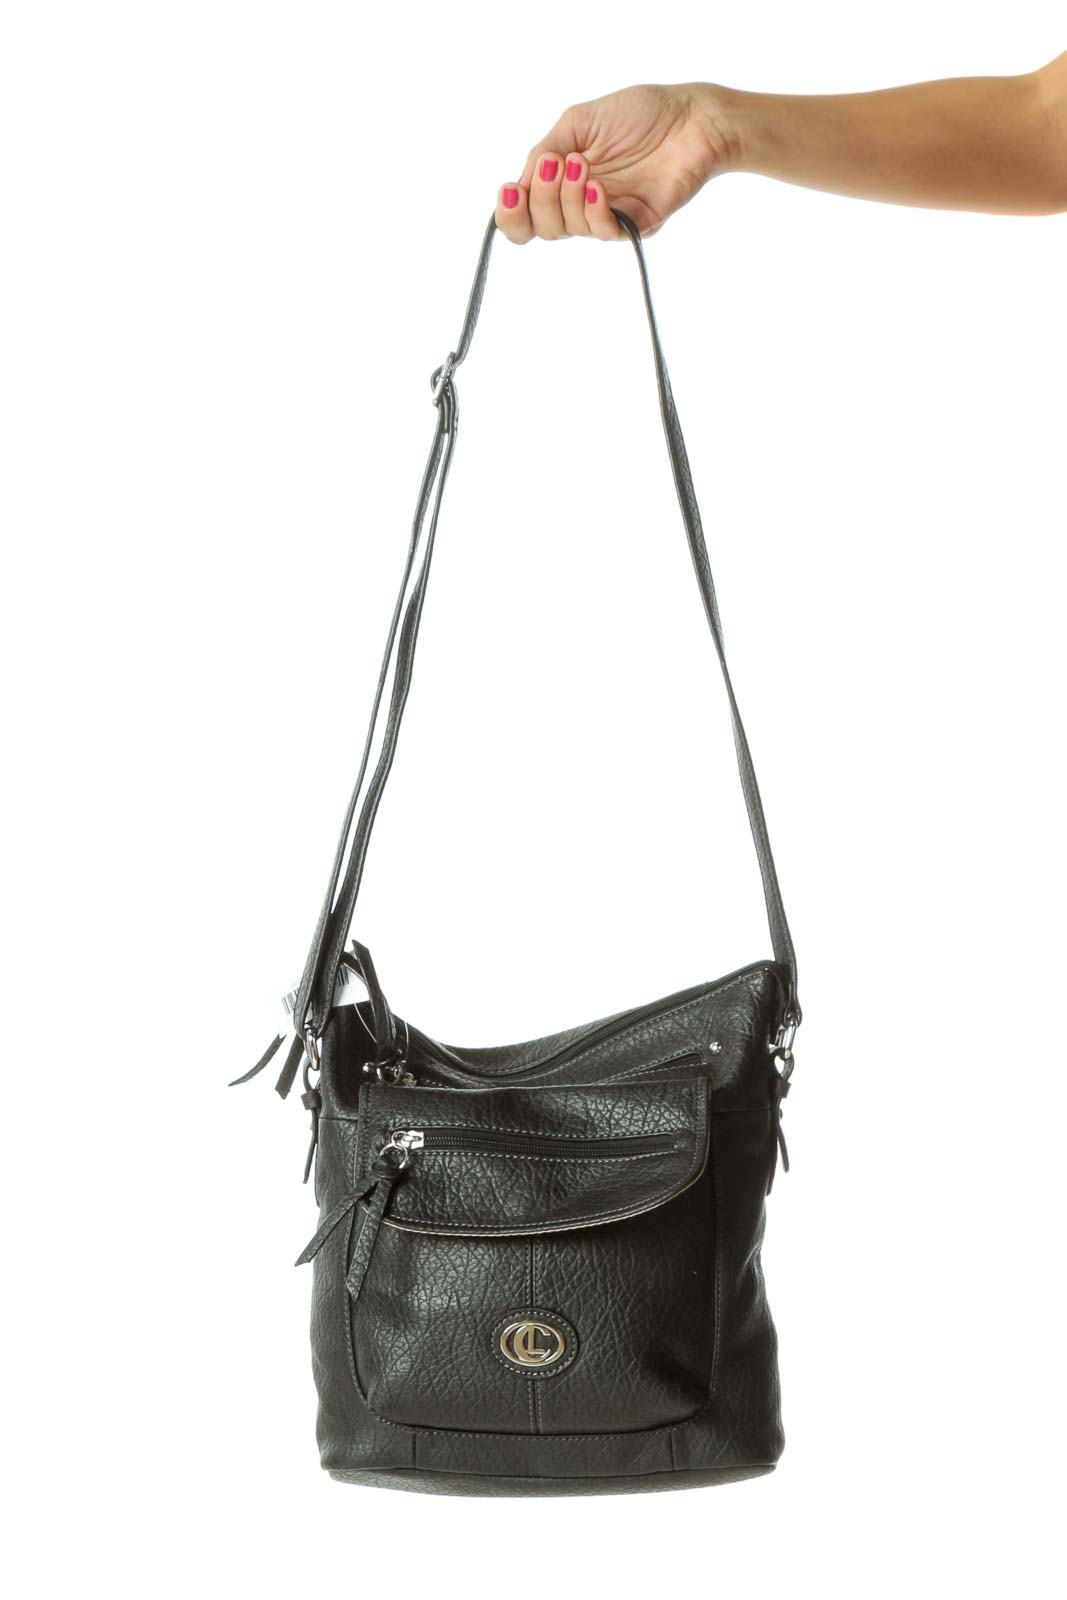 Black Faux-Textured-Leather Pocketed Crossbody Bag Front